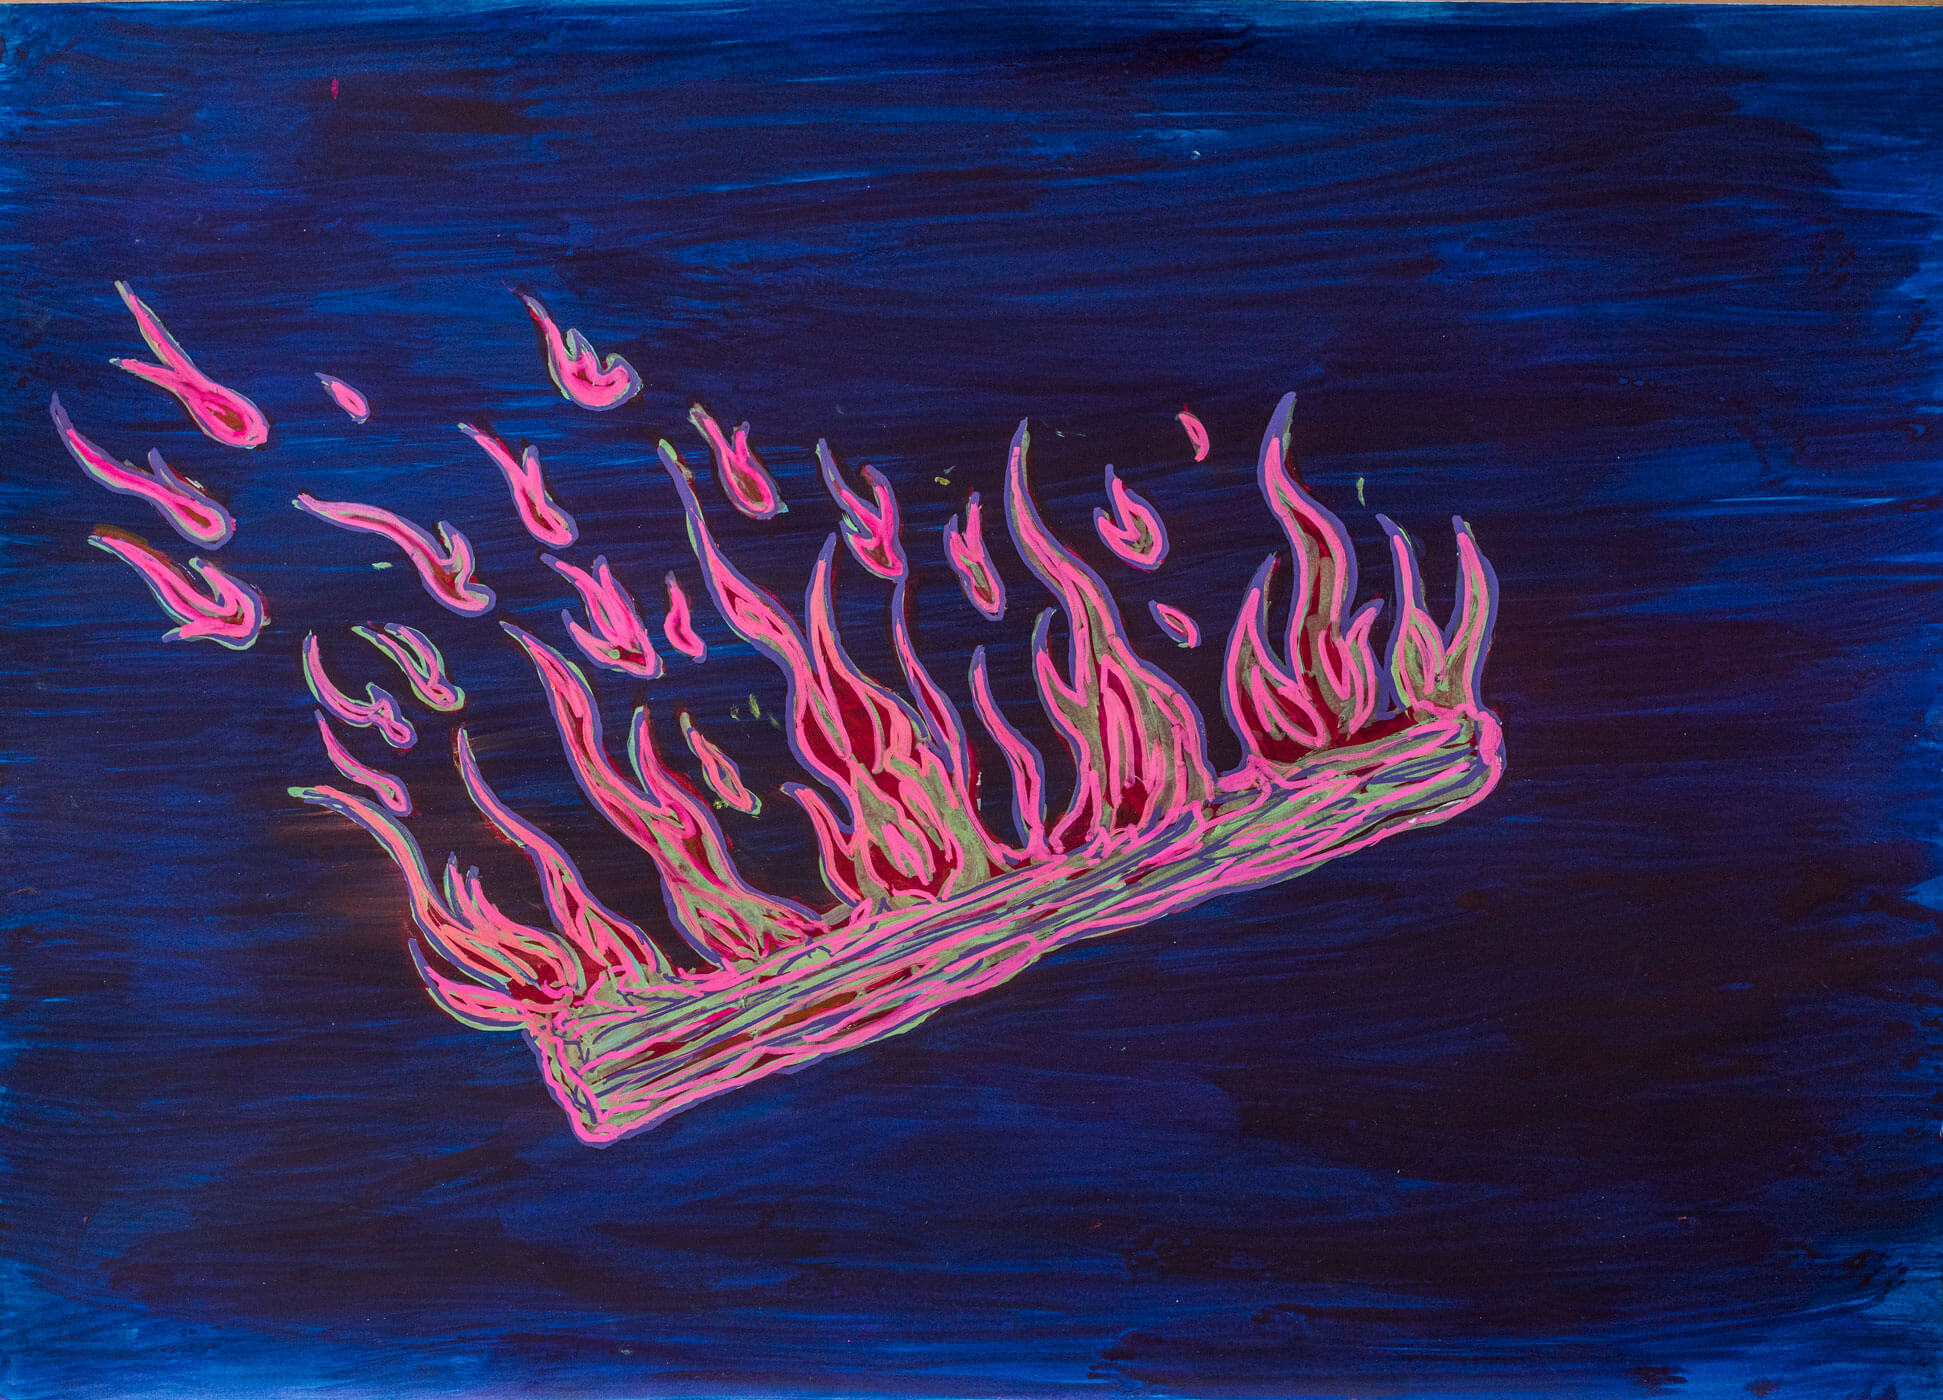 Gilles Rotzetter, Great fire falling off the sky, 2017, Courtesy of th artist